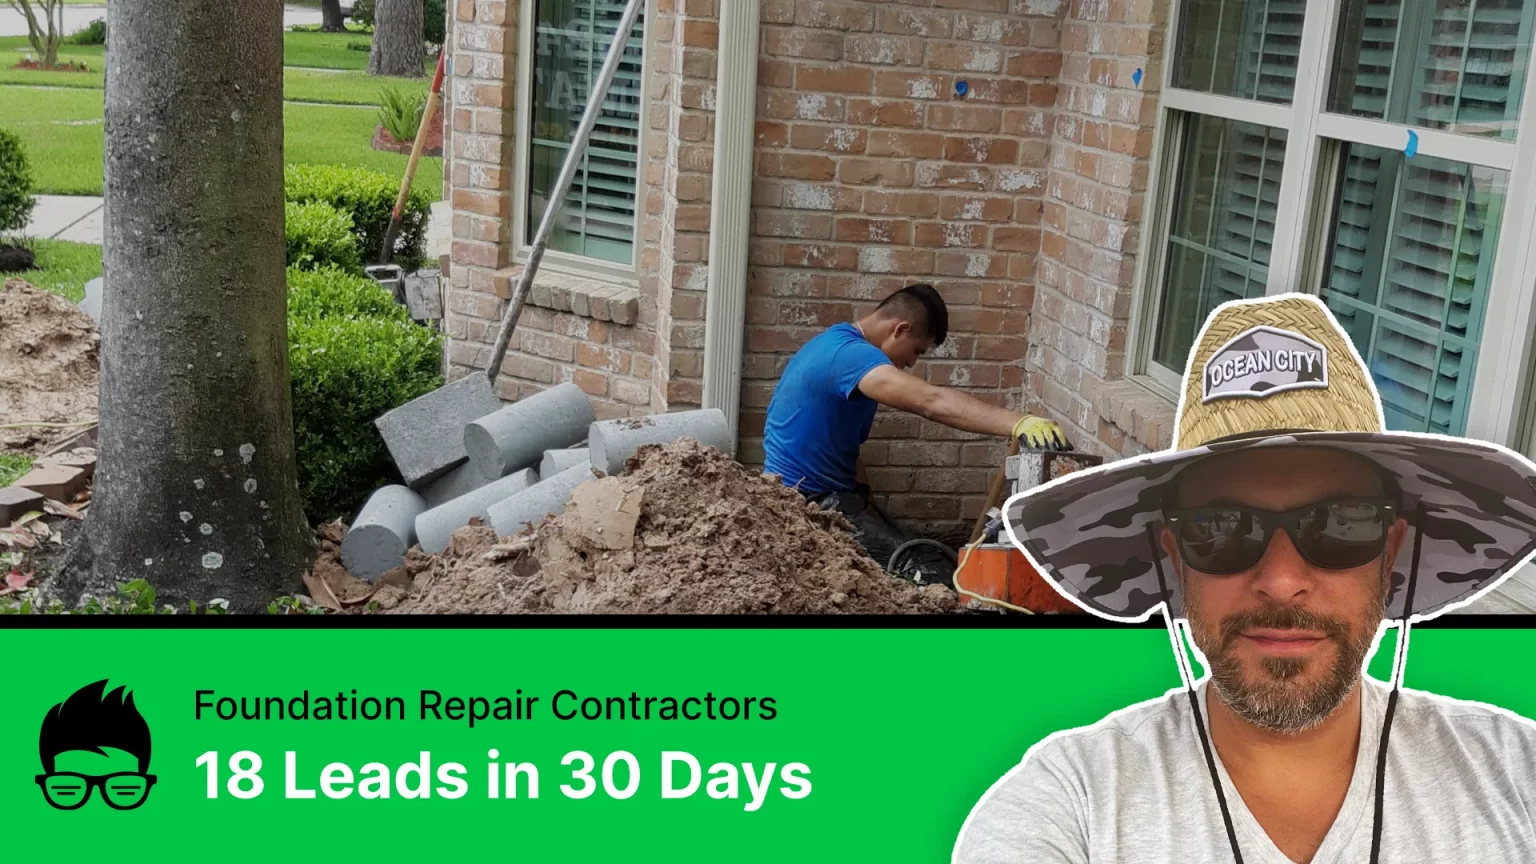 Google Ads Case Study - Foundation Repair Contractor PPC Ads